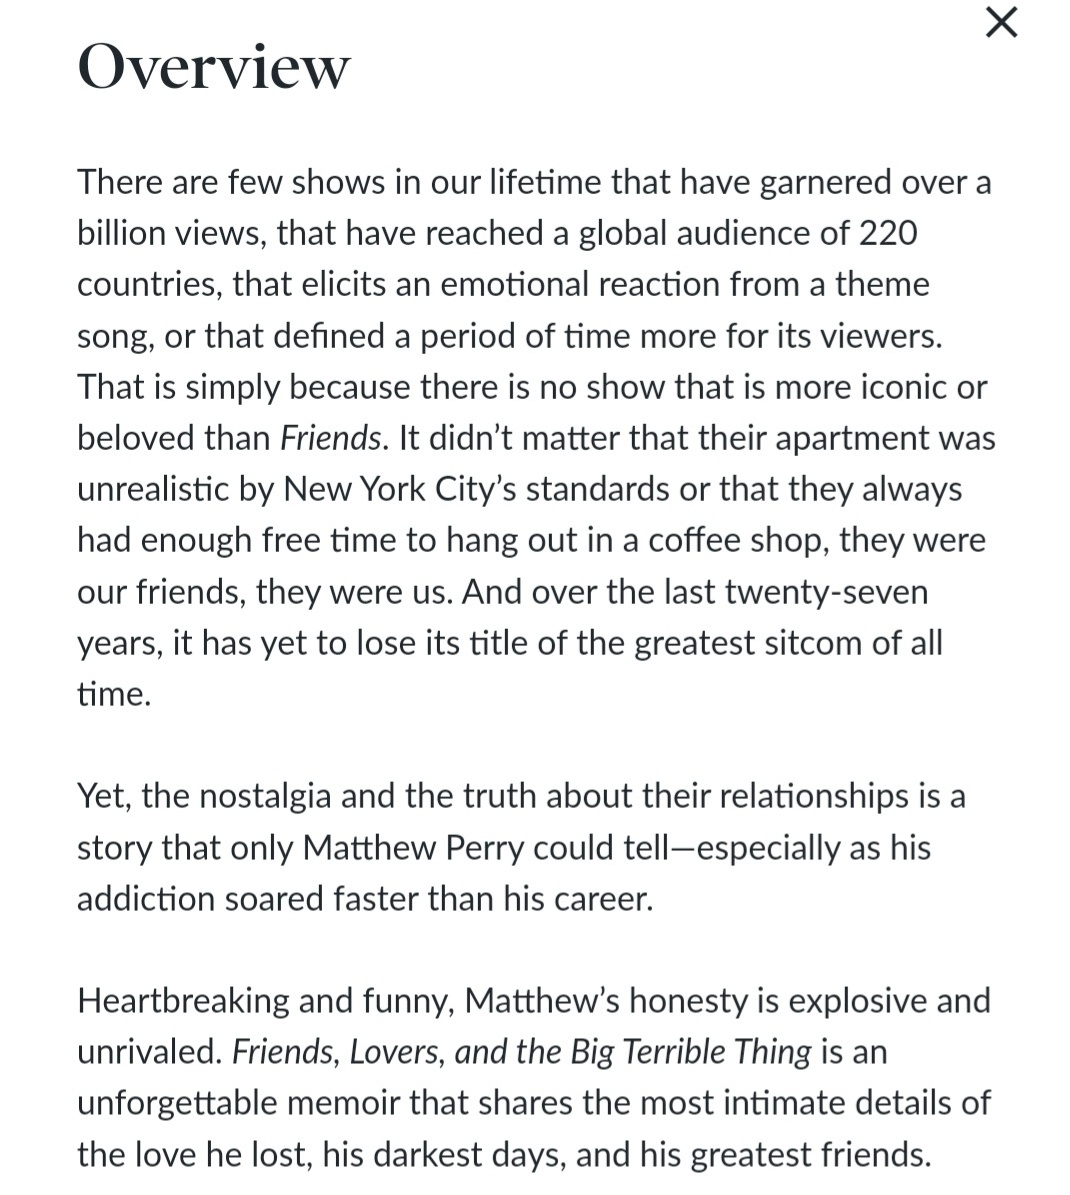 Friends, Lovers, And The Big Terrible Thing - By Matthew Perry